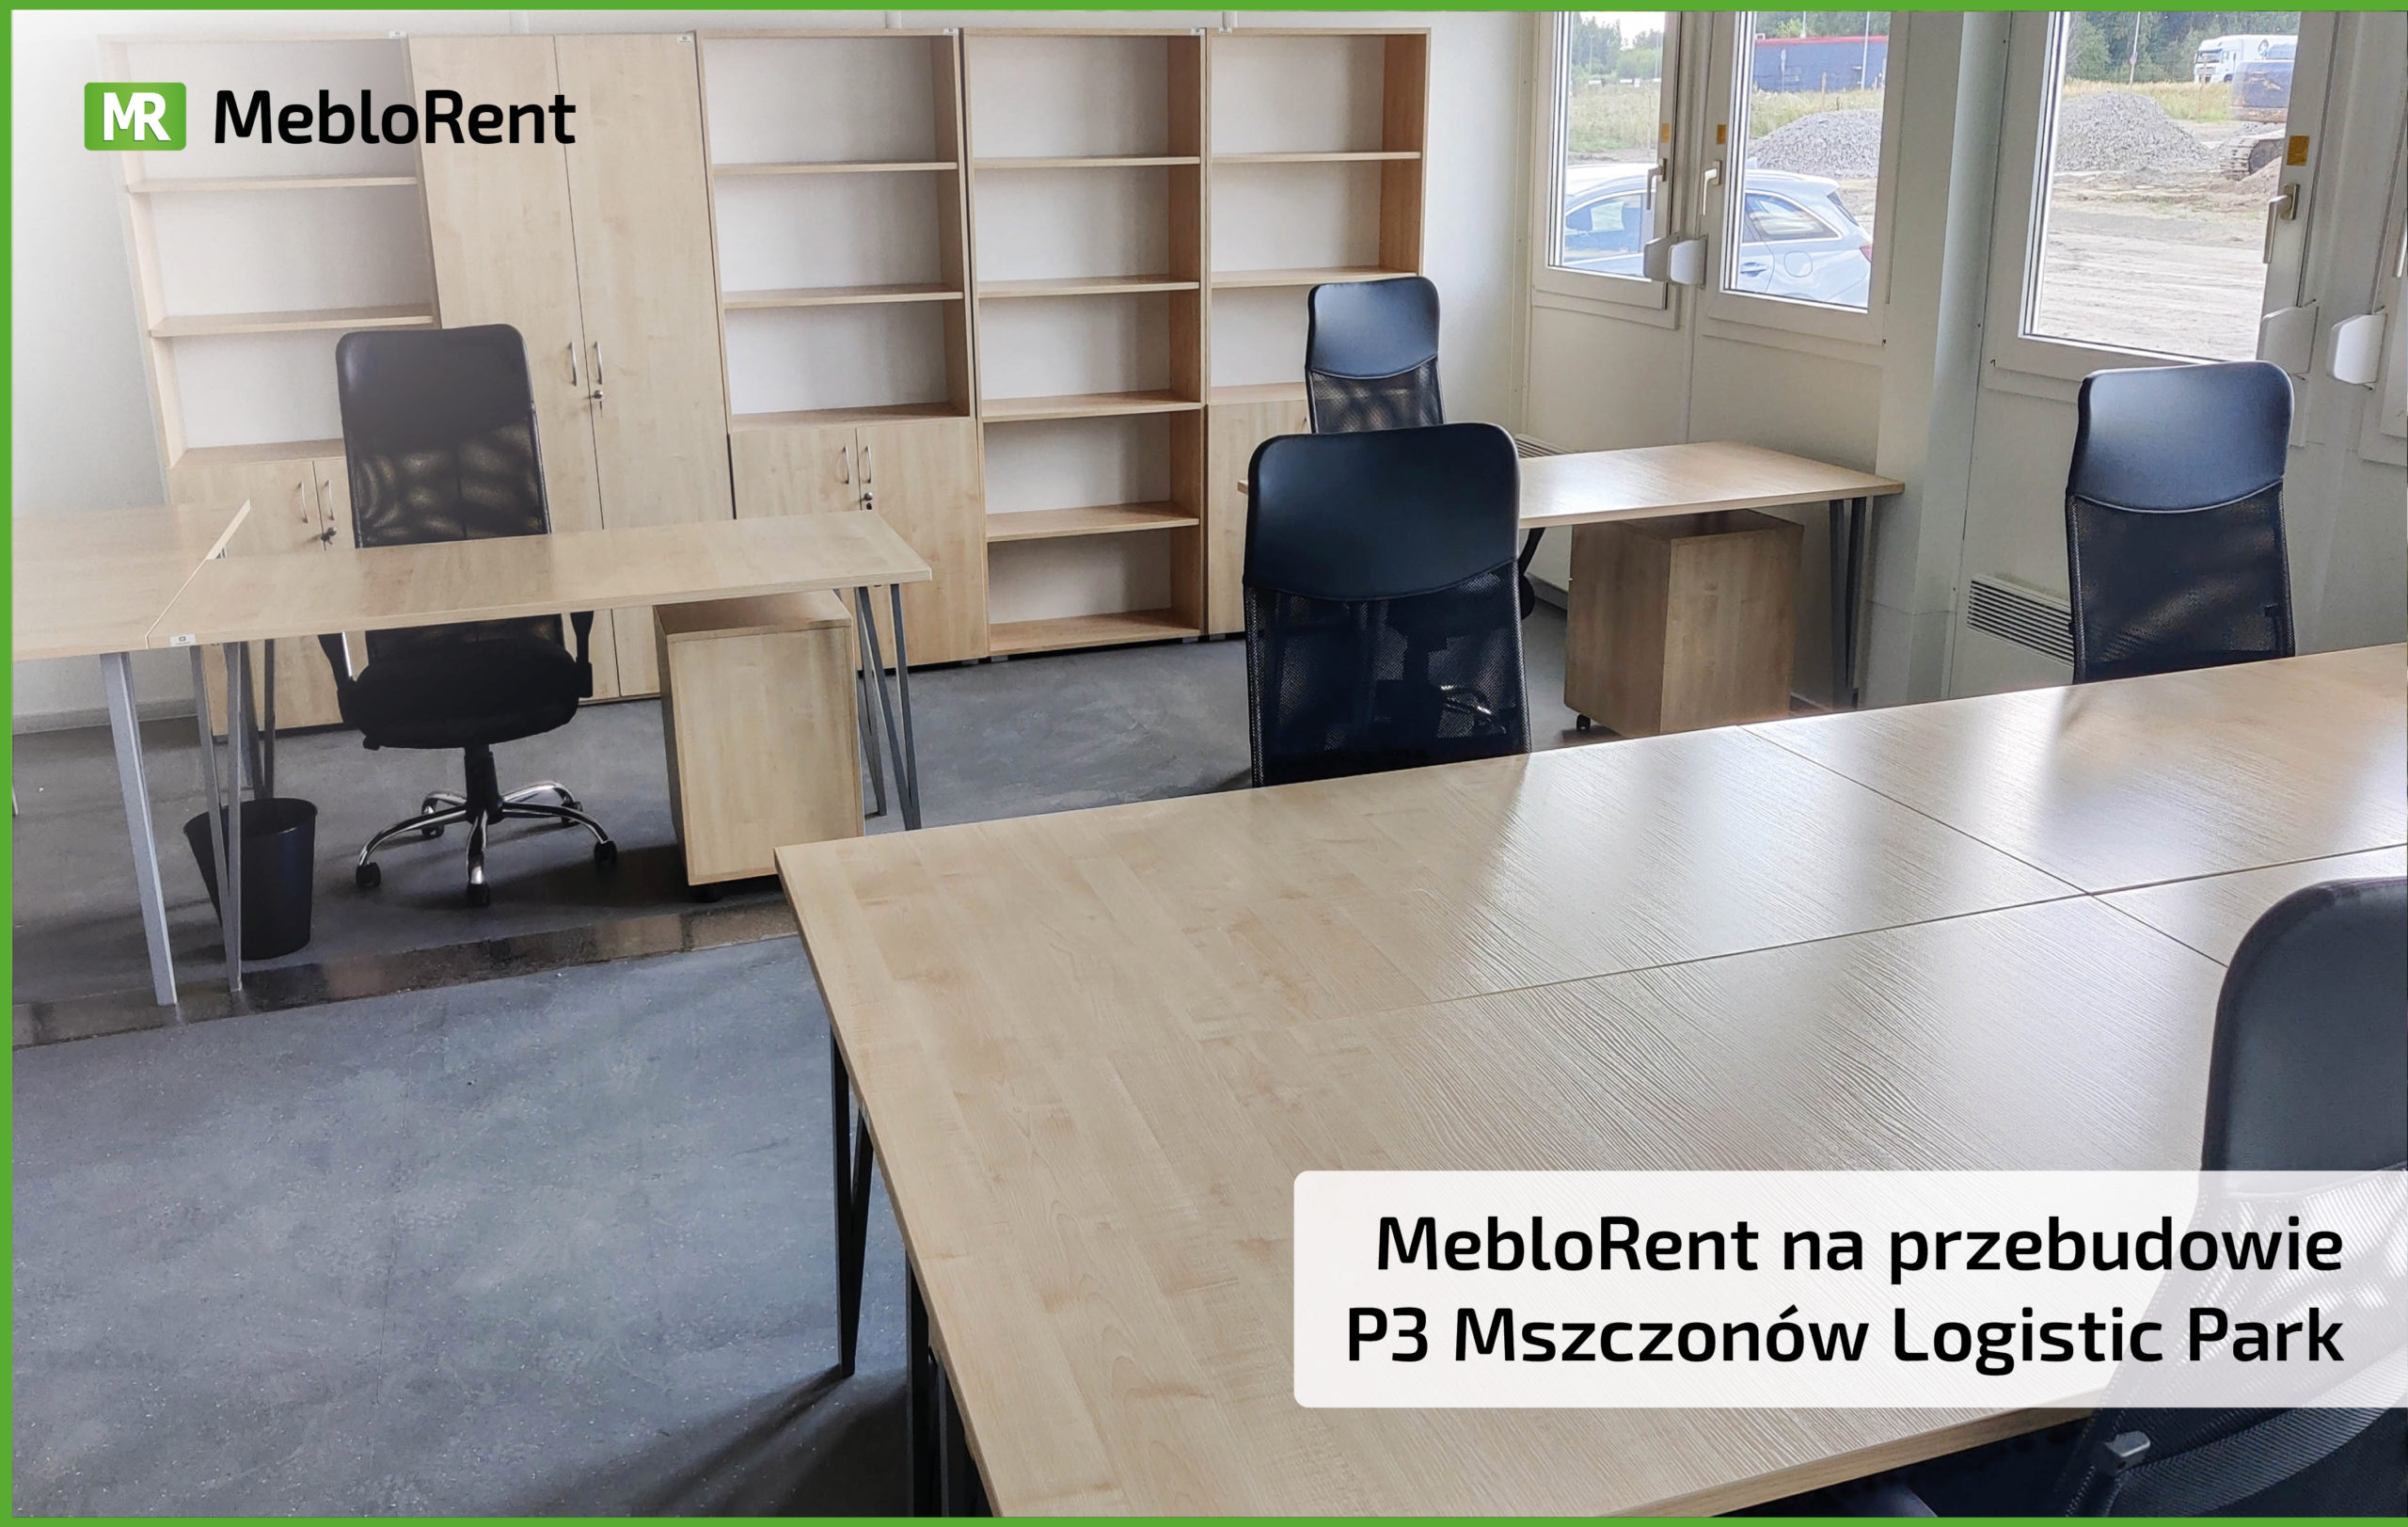 You are currently viewing MebloRent na przebudowie P3 Mszczonów Logistic Park